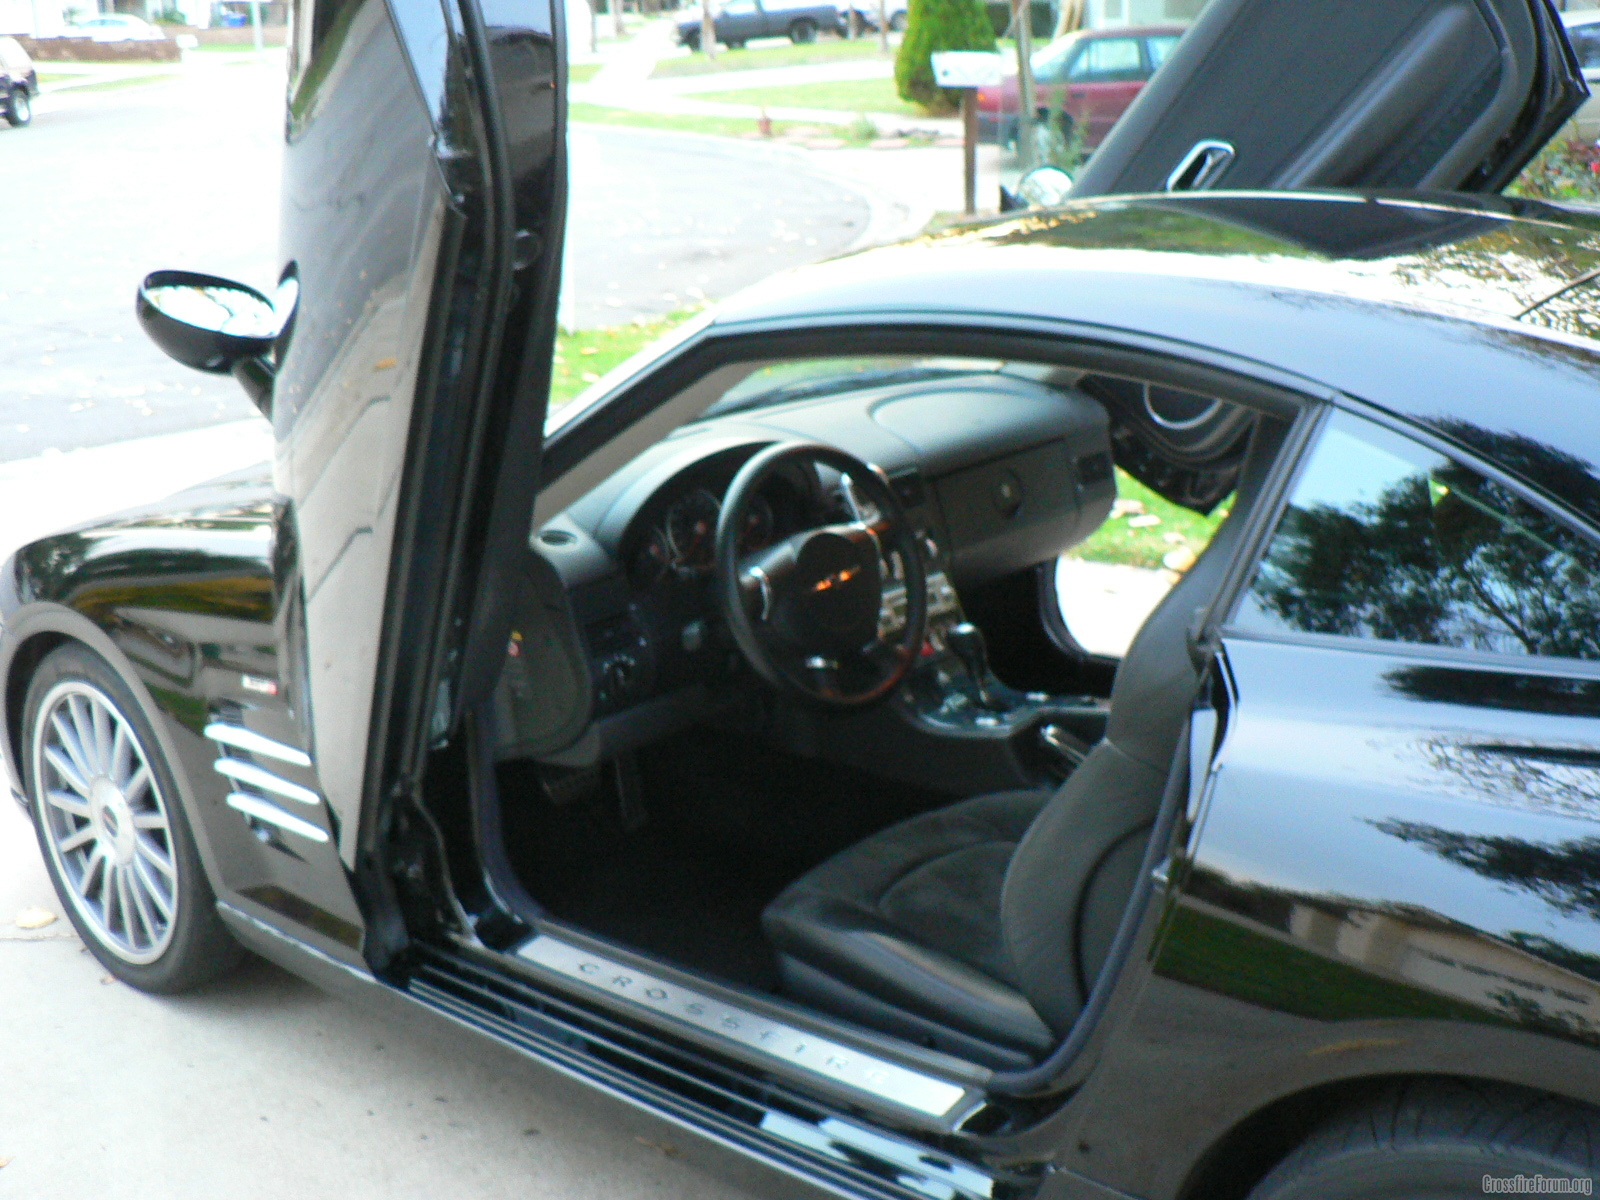 Lambo doors, Yes or No? - Page 2 - CrossfireForum - The Chrysler